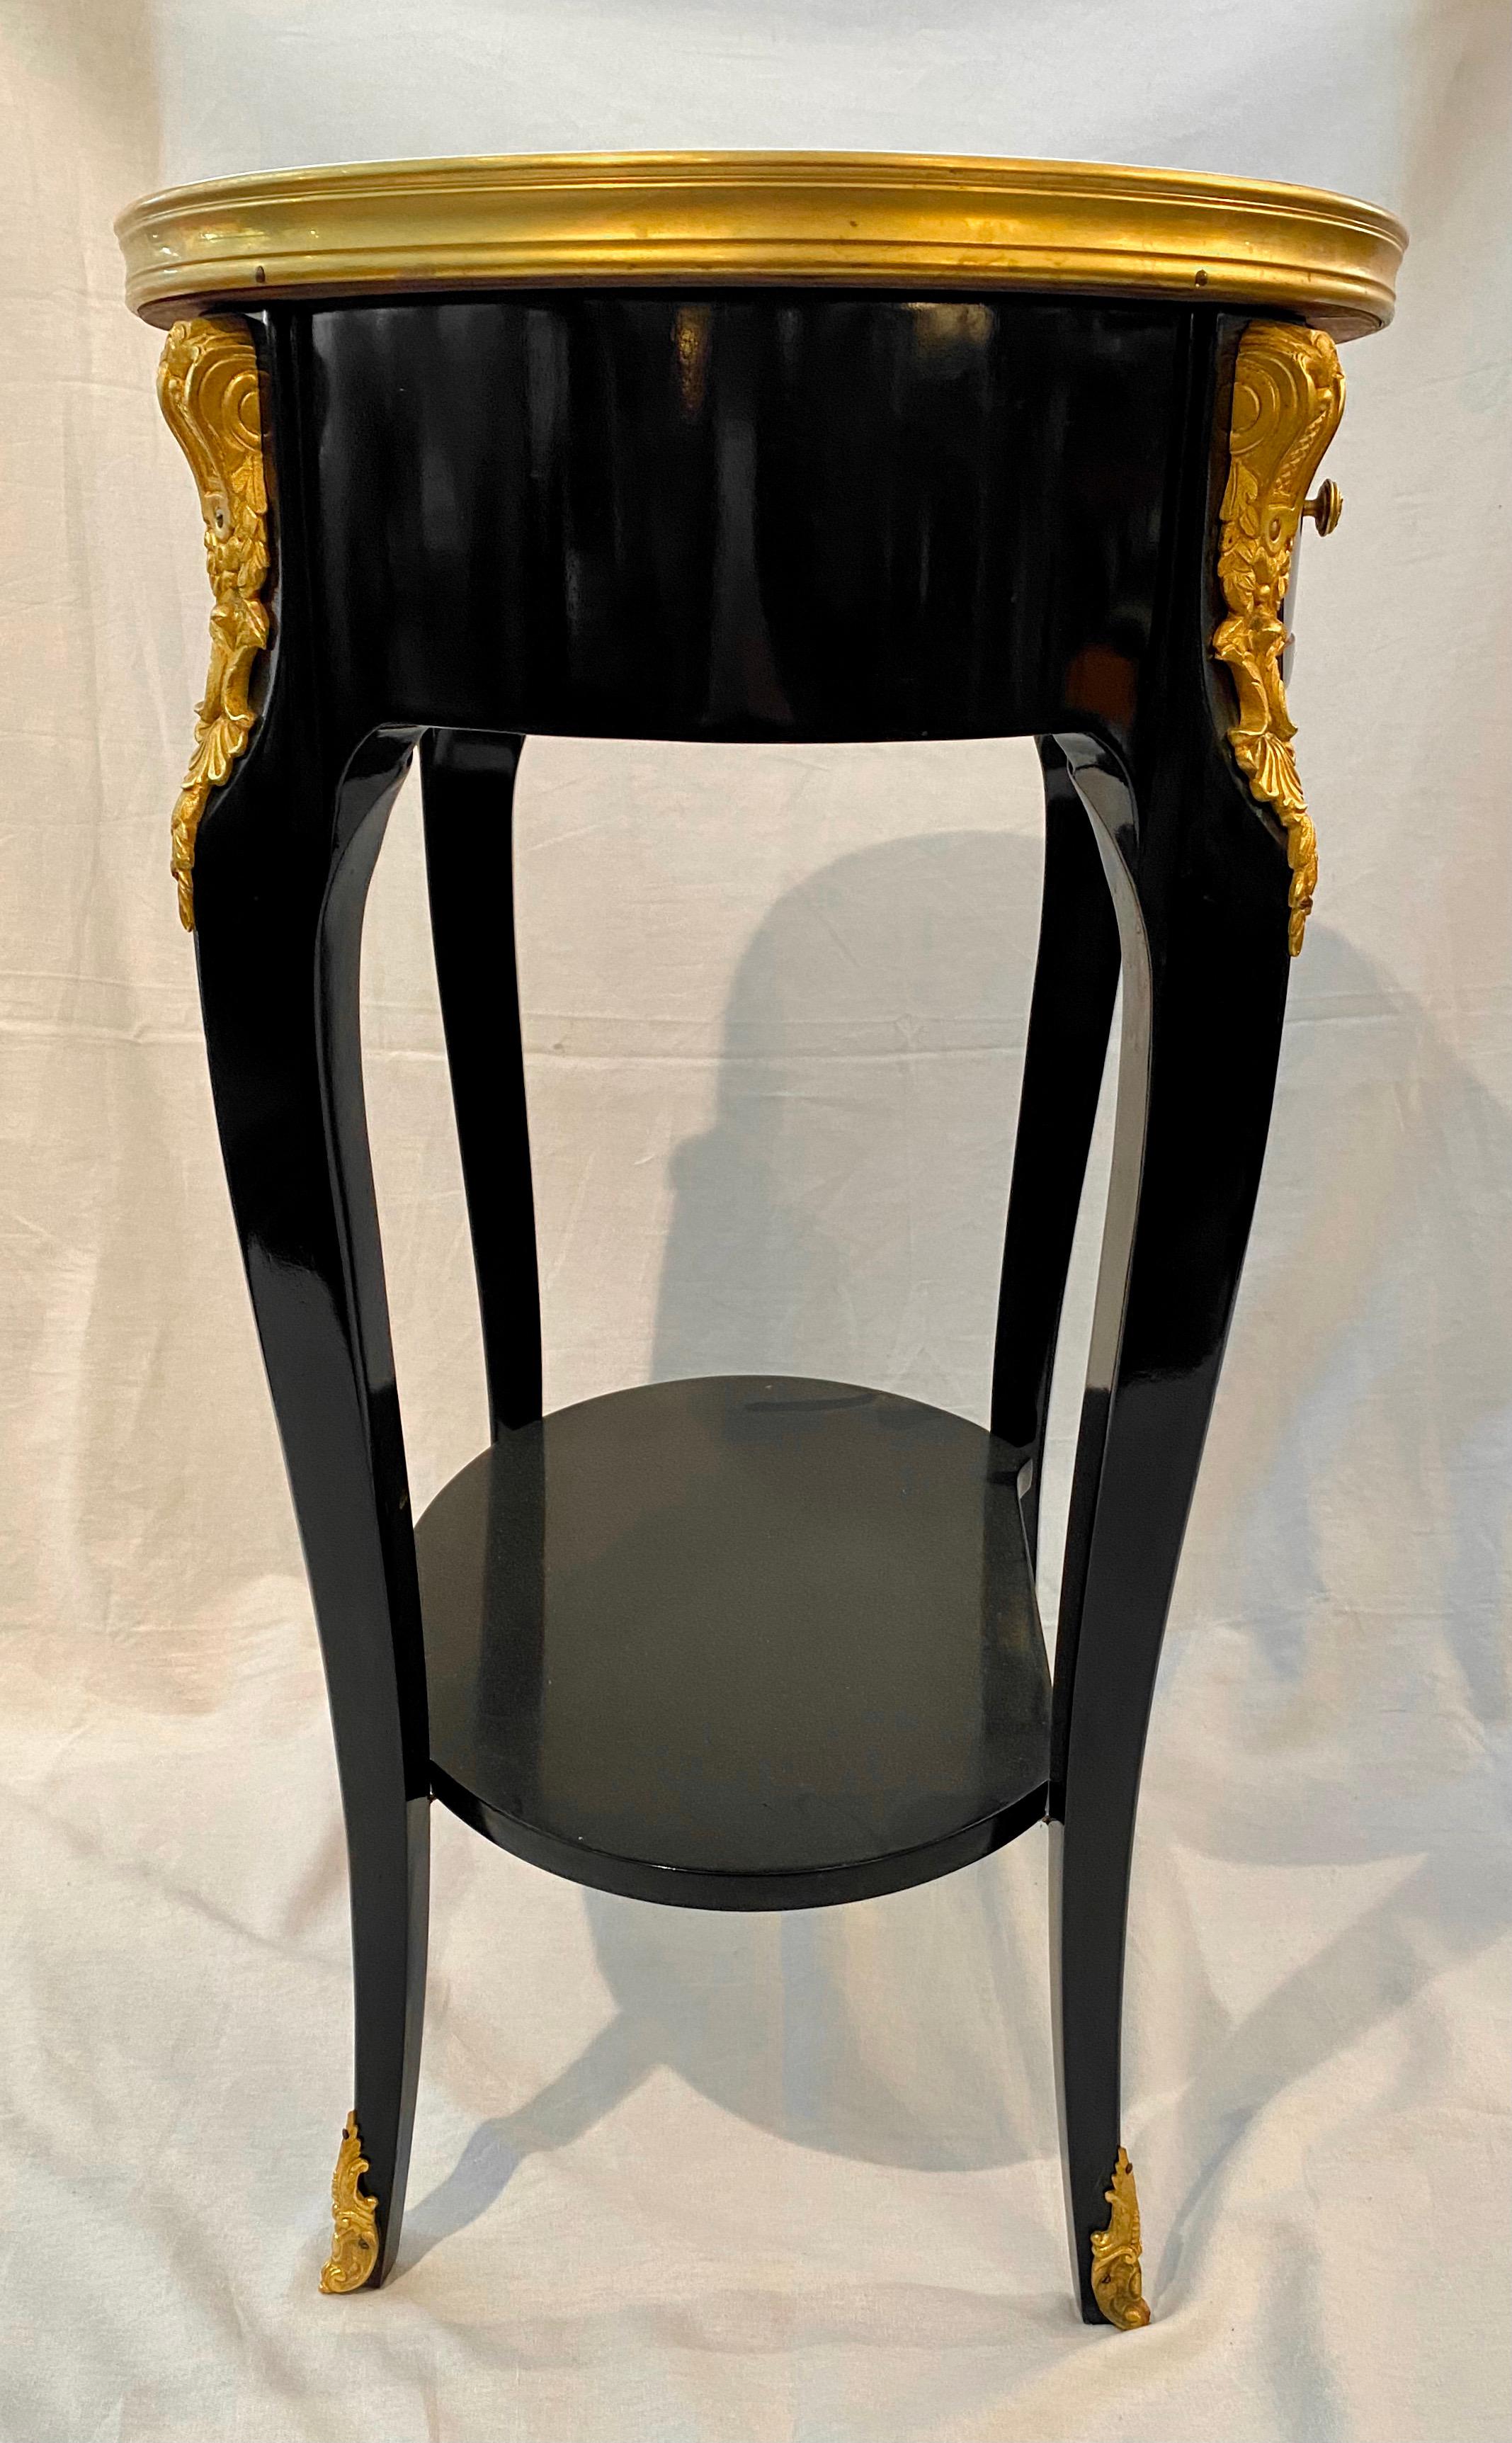 Gilt Pair of Louis XV Style Ebonized Side Tables with Marble Tops and Ormulu Mounts For Sale